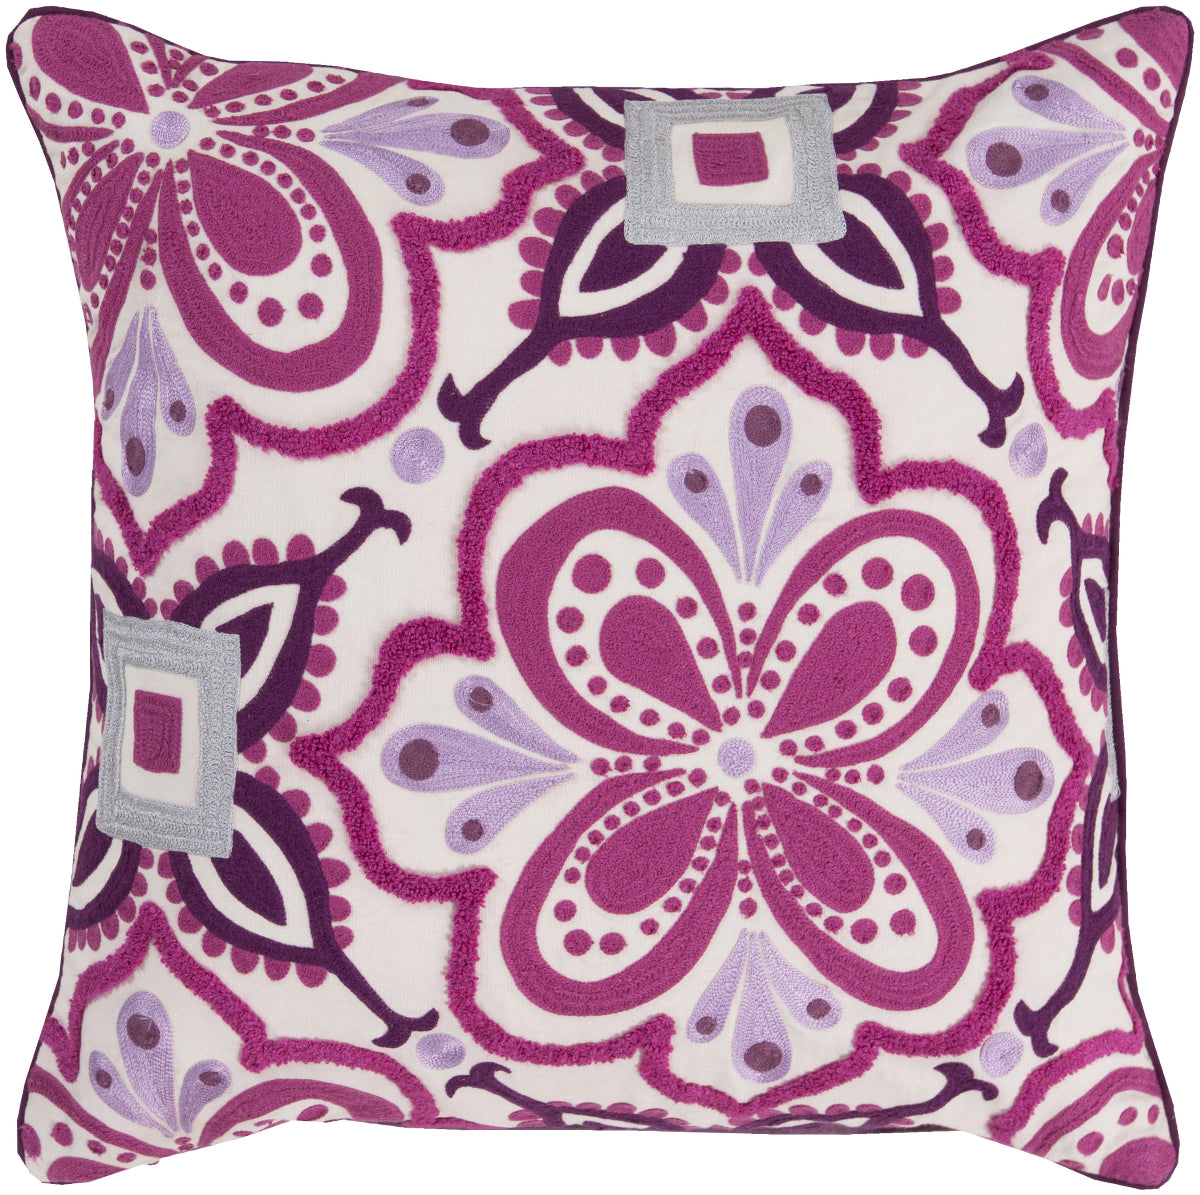 Surya Alhambra Embroidered Modern in Morocco KS-010 Pillow by Kate Spain main image